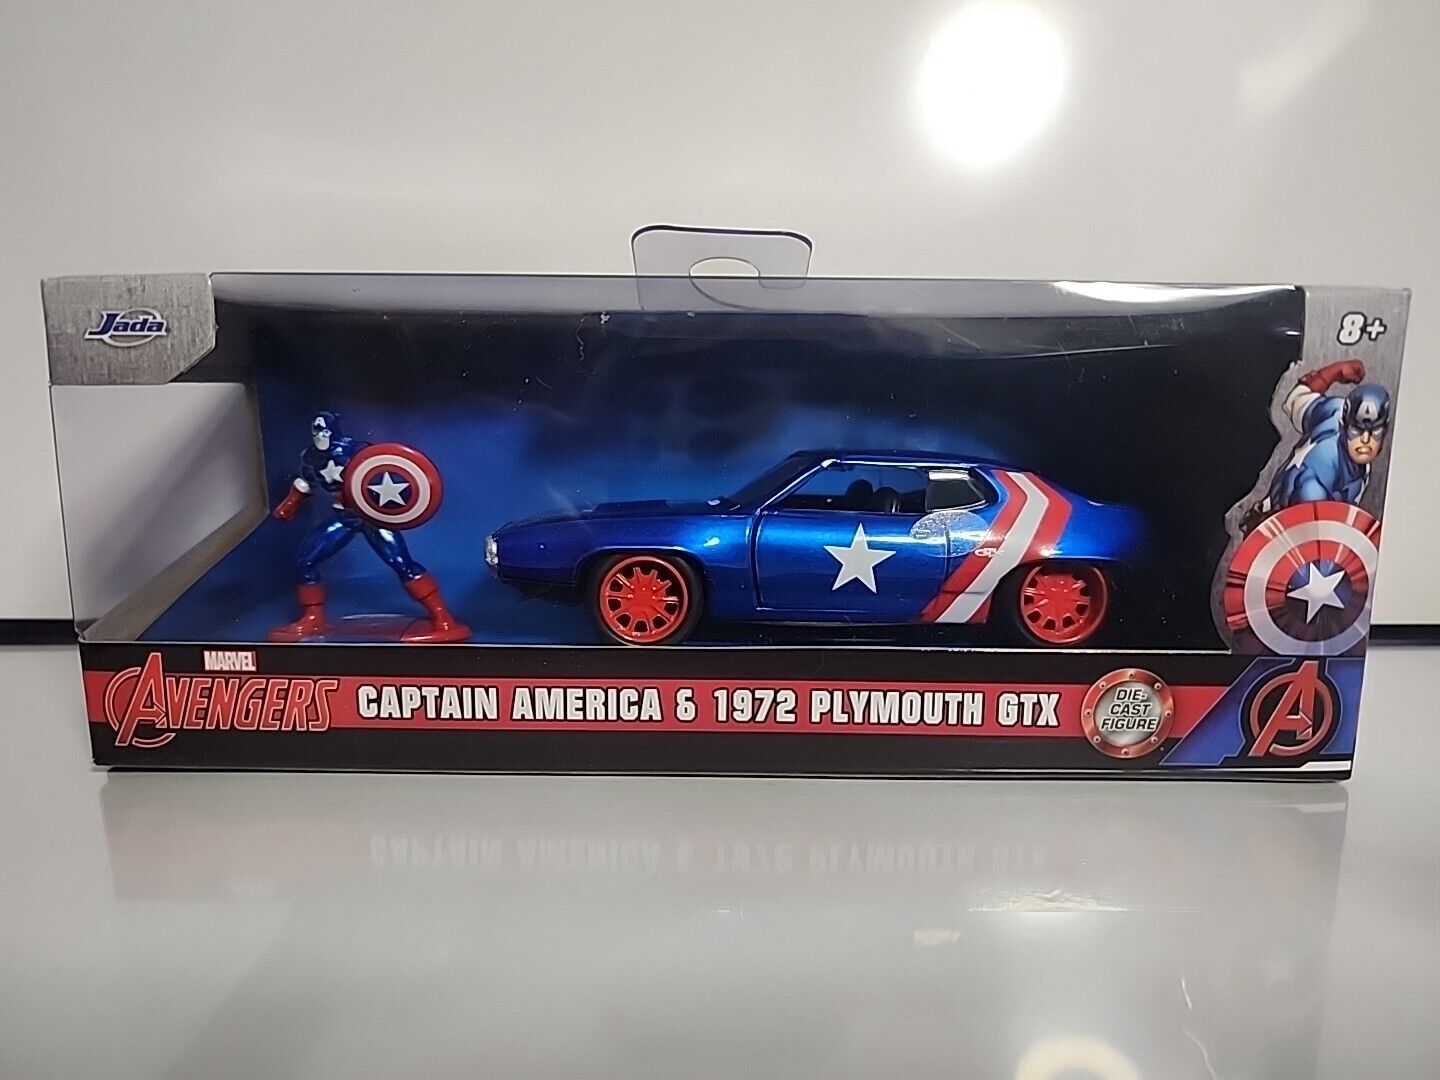 1972 PLYMOUTH GTX & CAPTAIN AMERICA FIGURE "THE AVENGERS" 1/32 BY JADA 33081